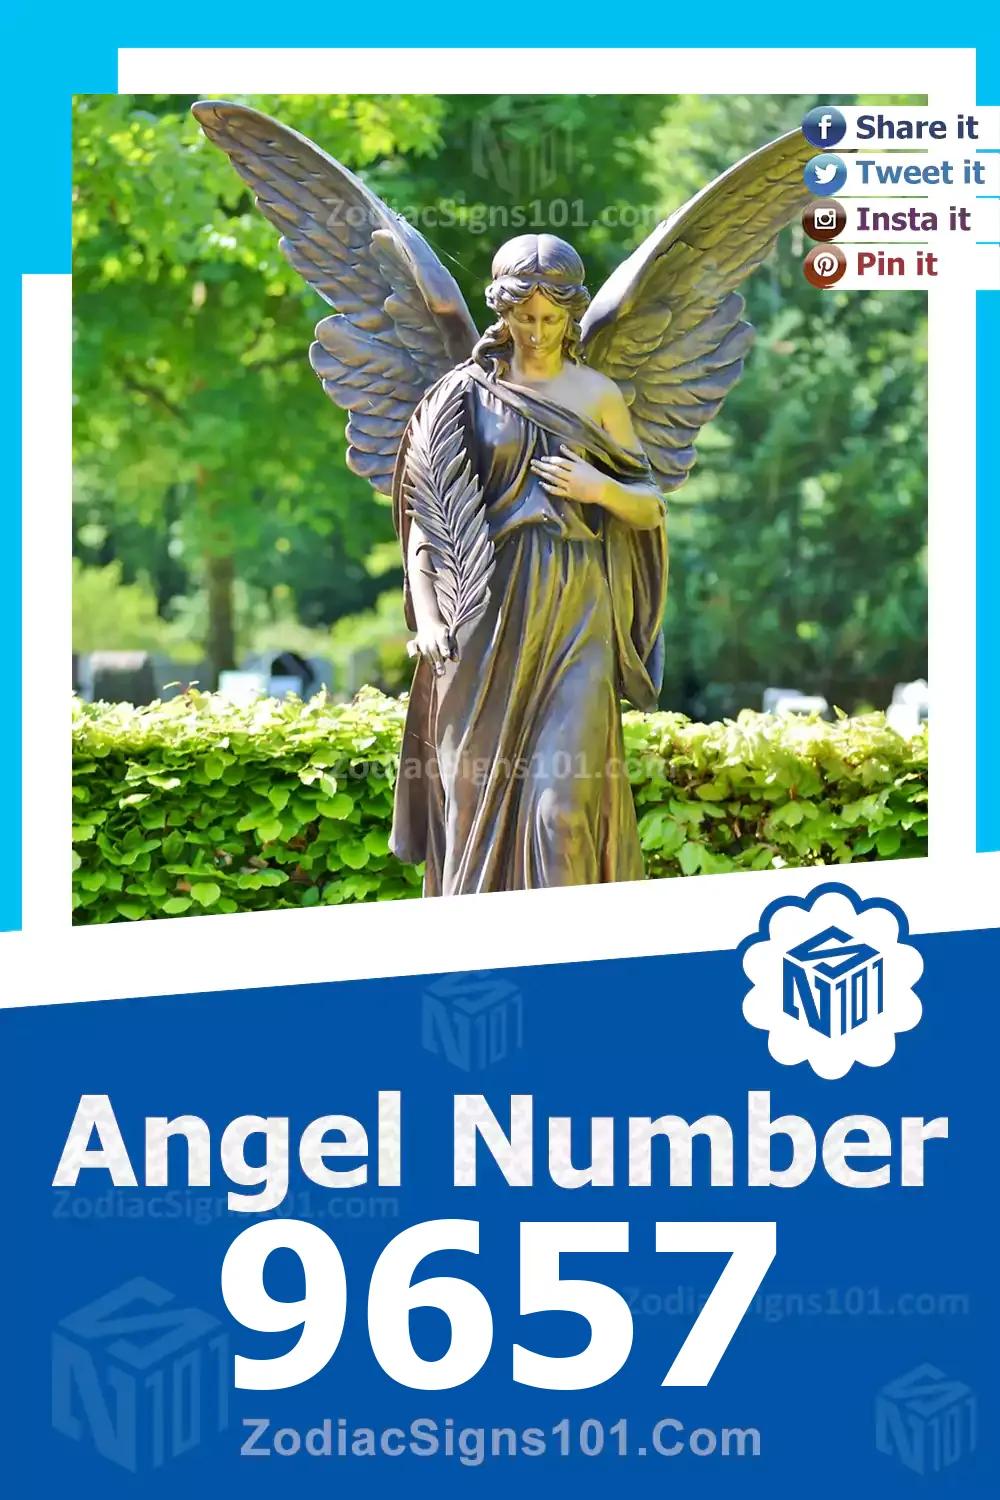 9657 Angel Number Meaning